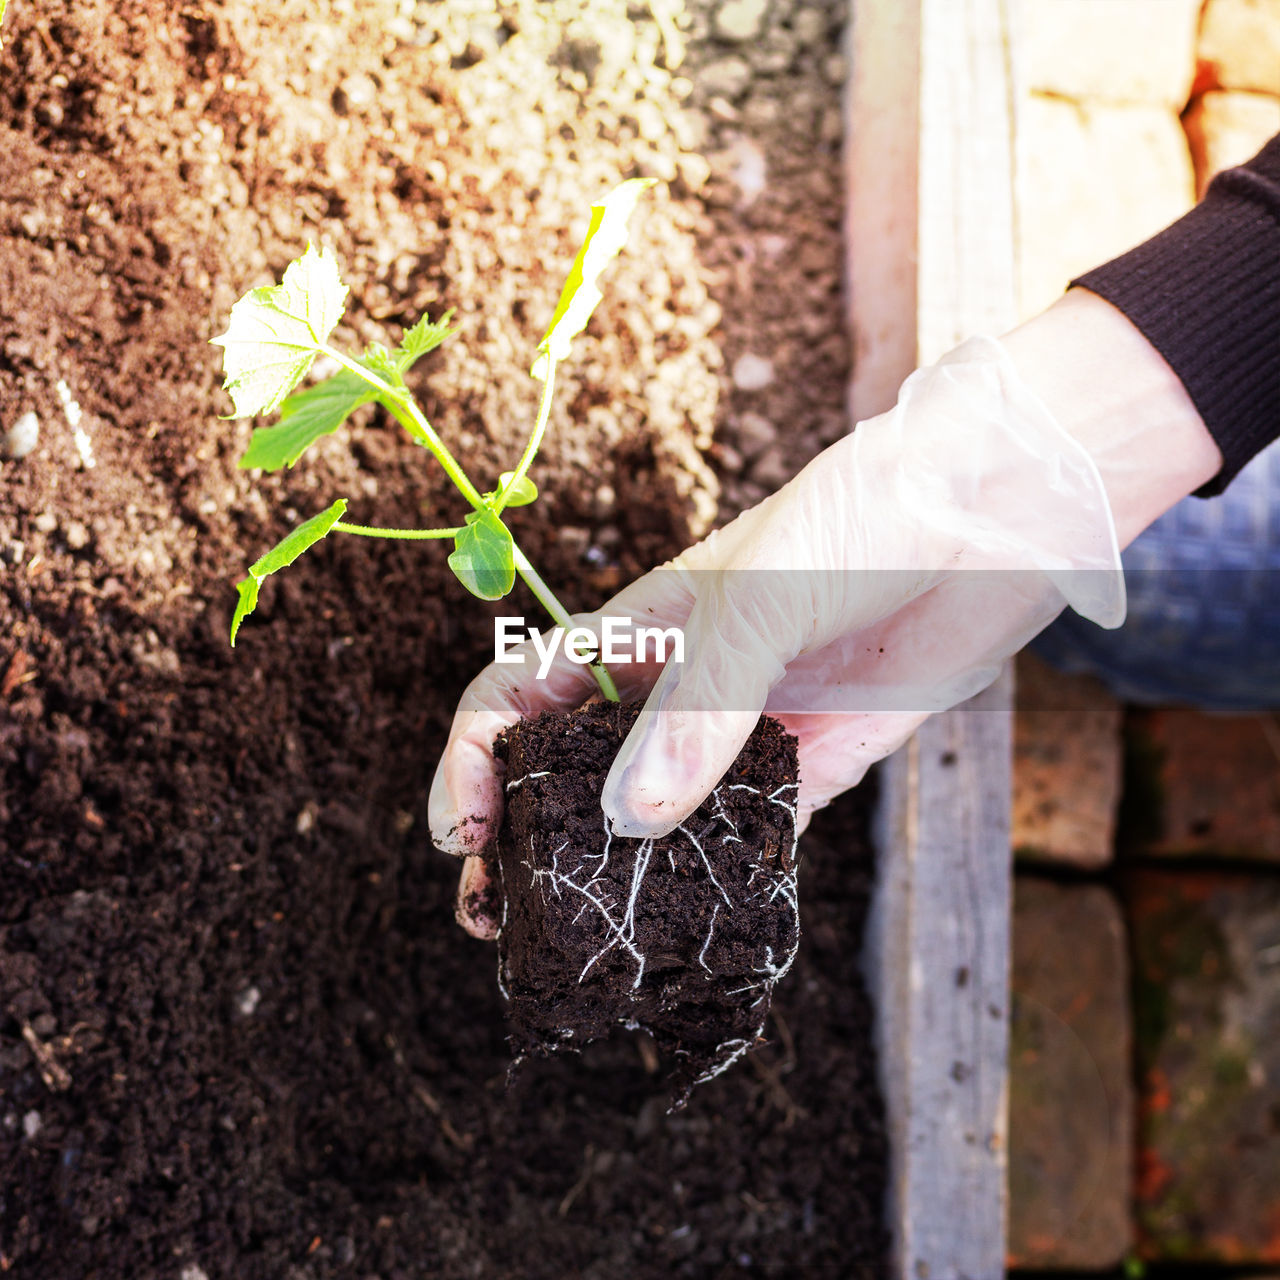 A woman's hand in a glove plants cucumber seedlings in the soil in a greenhouse on a spring day